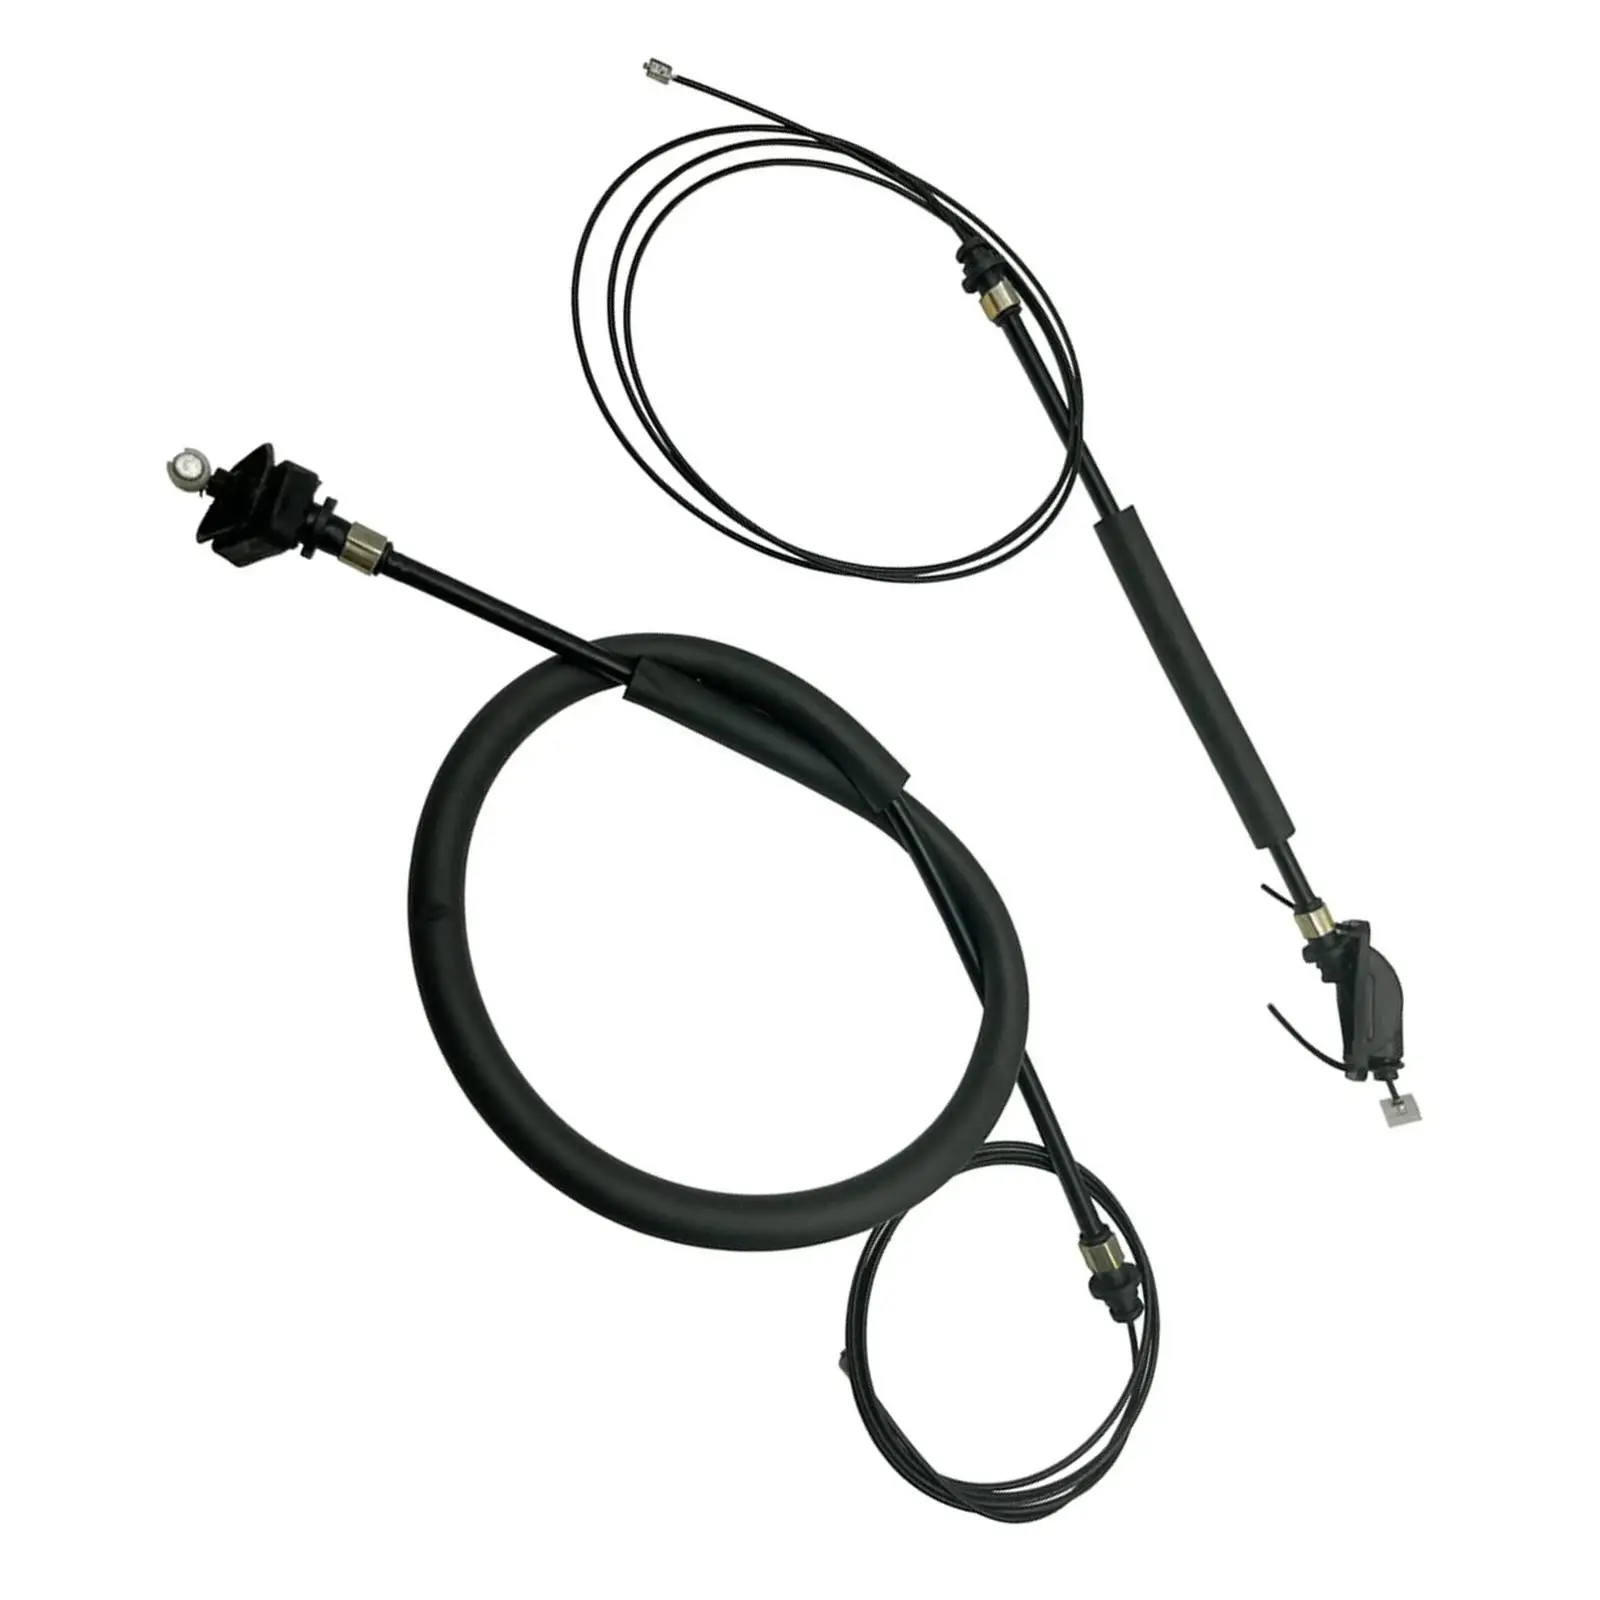 Power Sliding Door Cable Kit Metal Accessories for Honda Easily Install